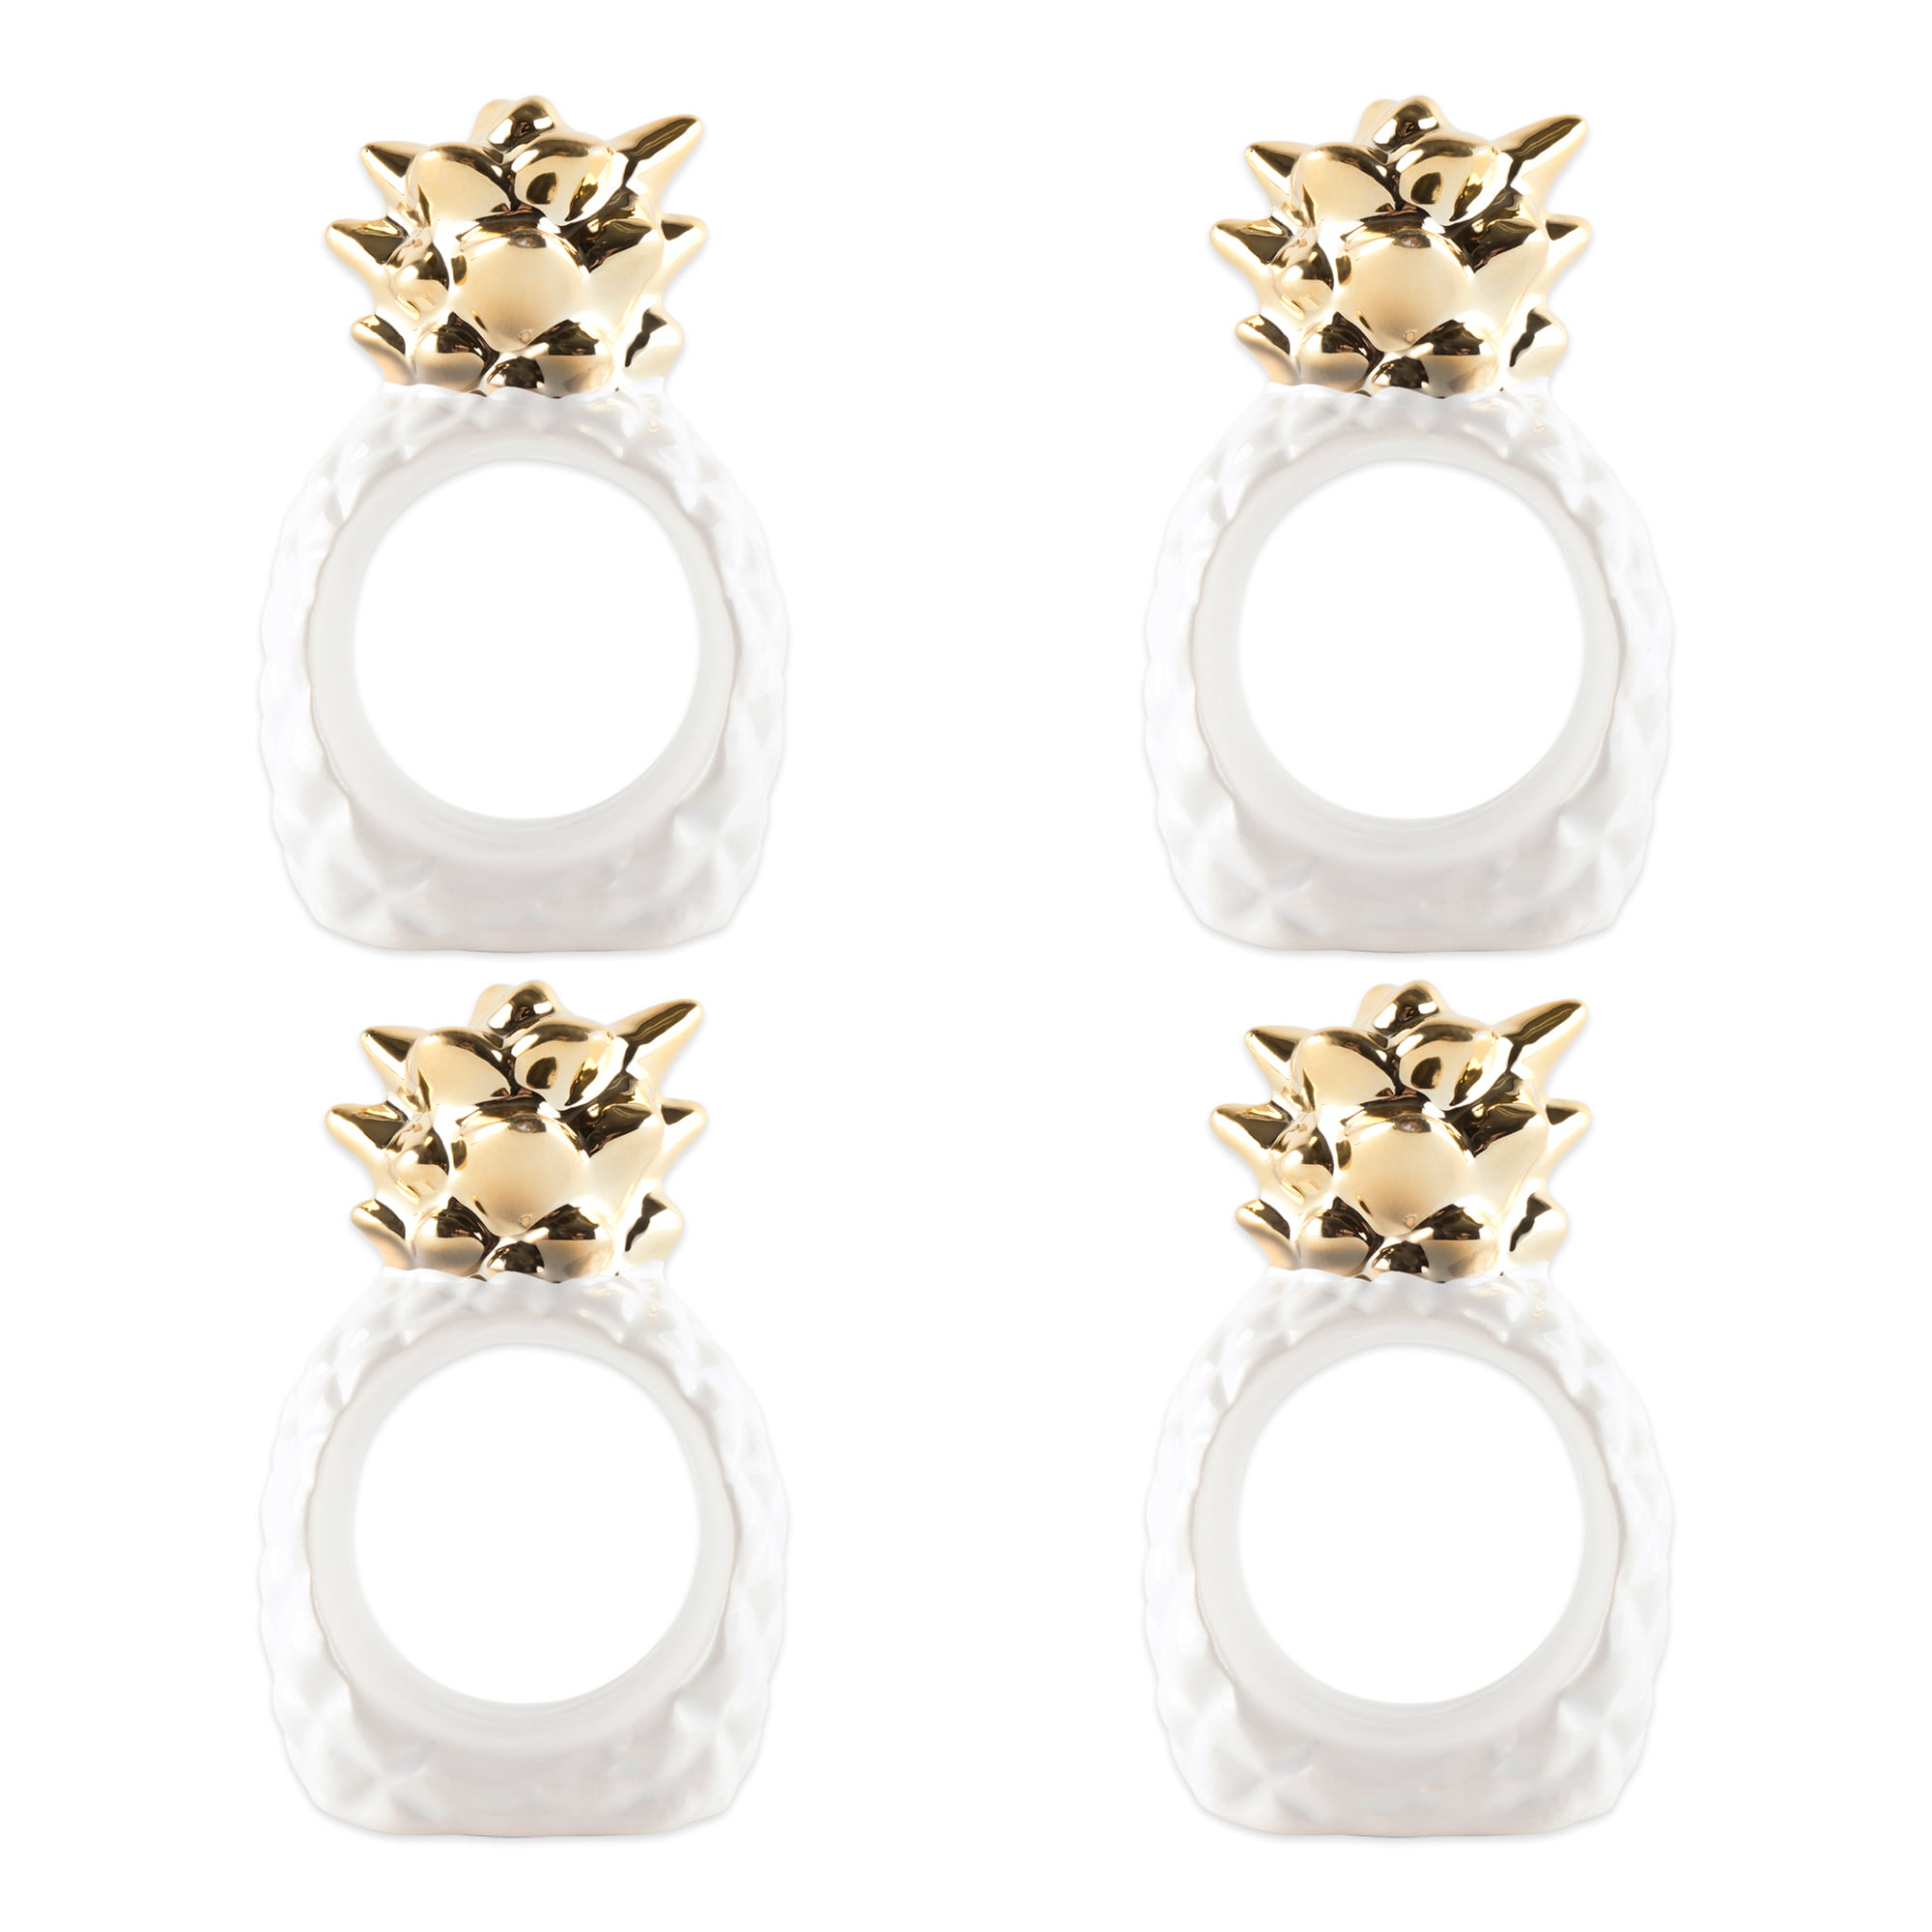 Picture of Design Imports CAMZ38805 Gold Pineapple Napkin Ring - Set of 4